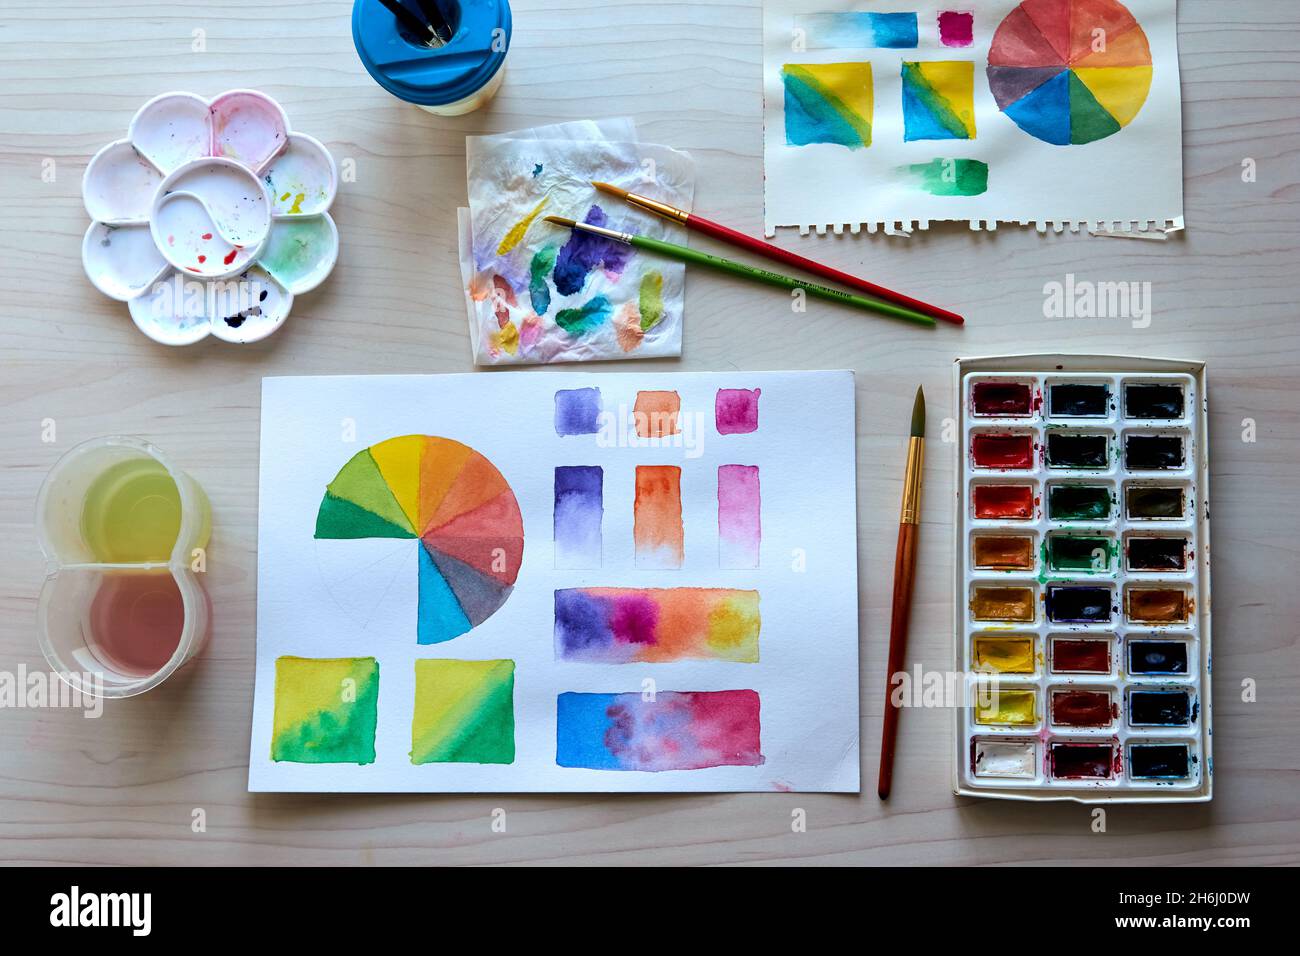 Artist's Workplace. Art Supplies Brushes, Paints, Watercolors. Art Studio. Drawing Lessons. Creative Workshop. Design Place. Watercolor Color Wheel An Stock Photo - Alamy